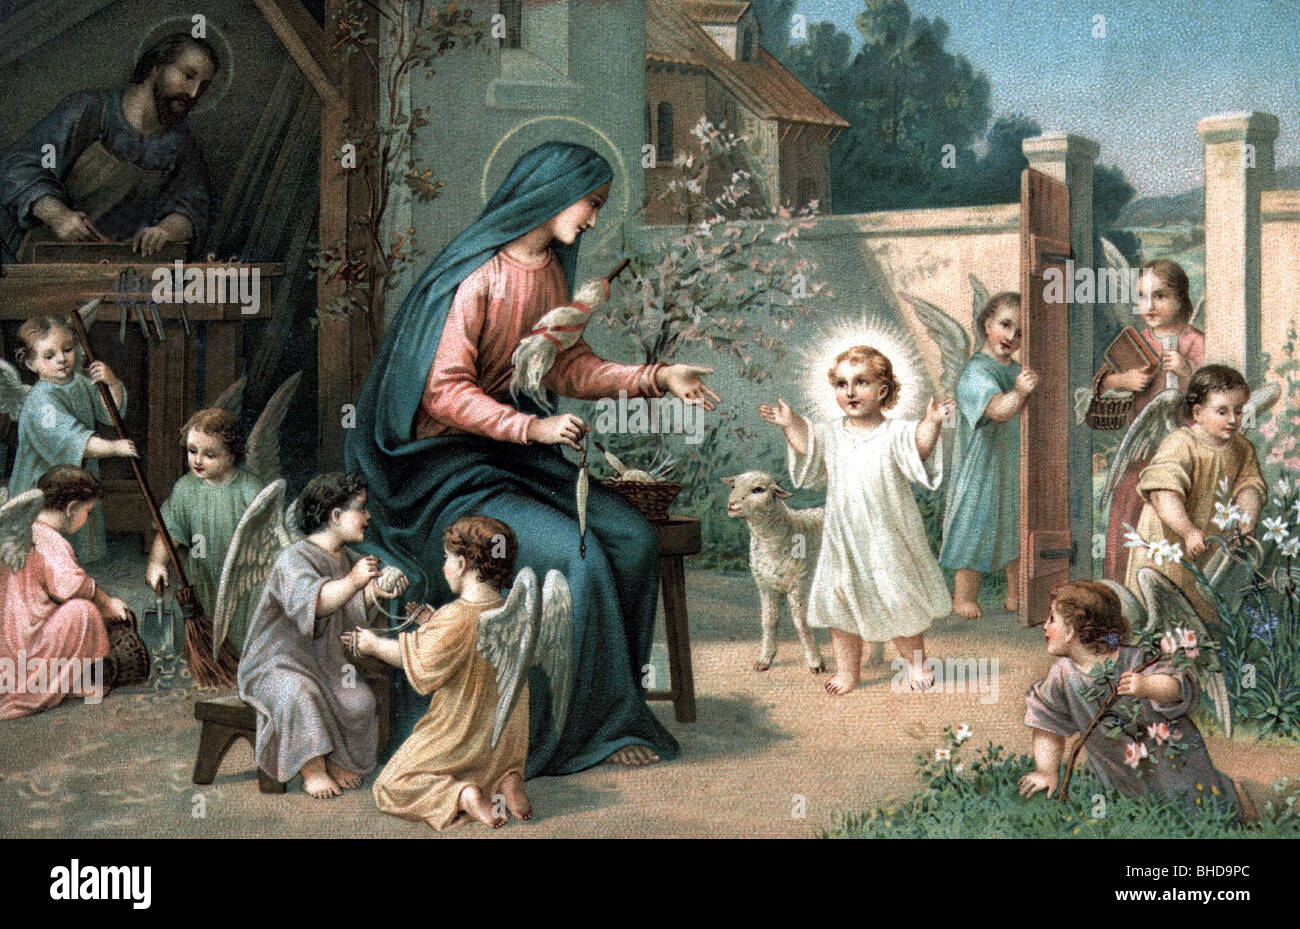 festivity, Easter, Holy Family and angels, postcard, 19th century, historic, historical, religion, Christianity, Jesus Christ, Joseph, madonna, Mary, garden, carpenter, gate, wall, gloriole, kitsch, religious art, child, kid, workshop, playing, lamb, people, Stock Photo